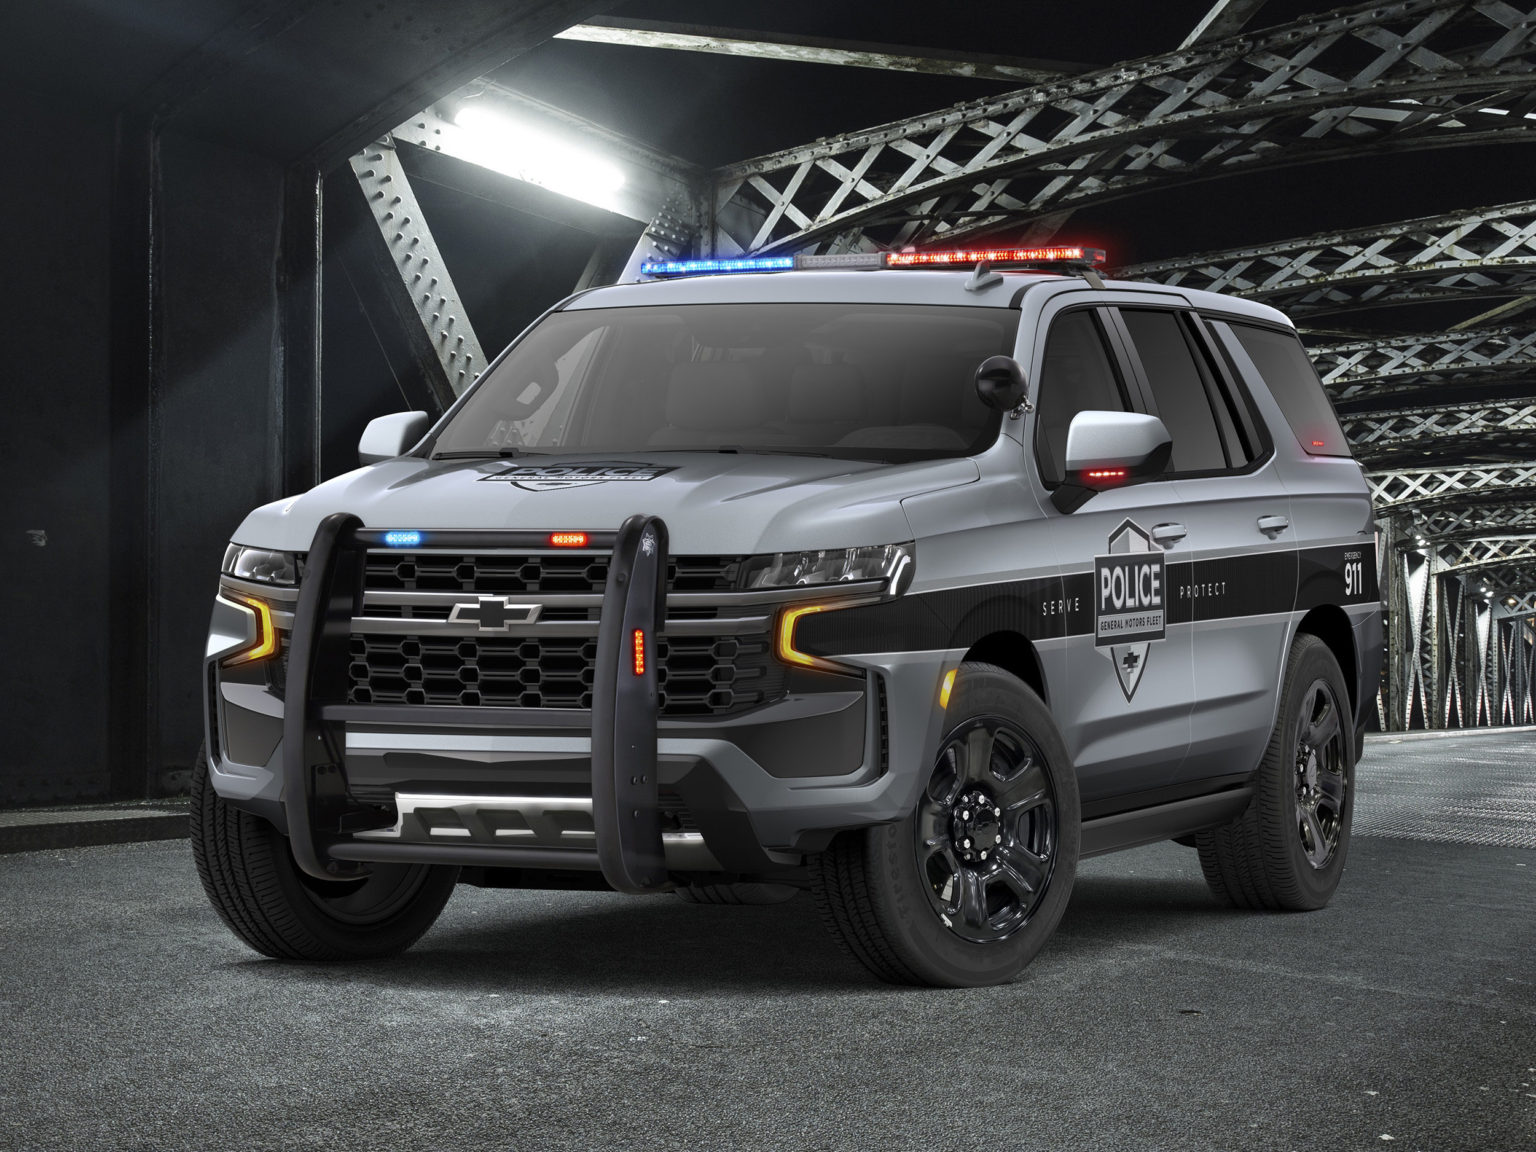 The 2021 Chevrolet Tahoe PPV builds on the traditional Tahoe Z71 trim level.